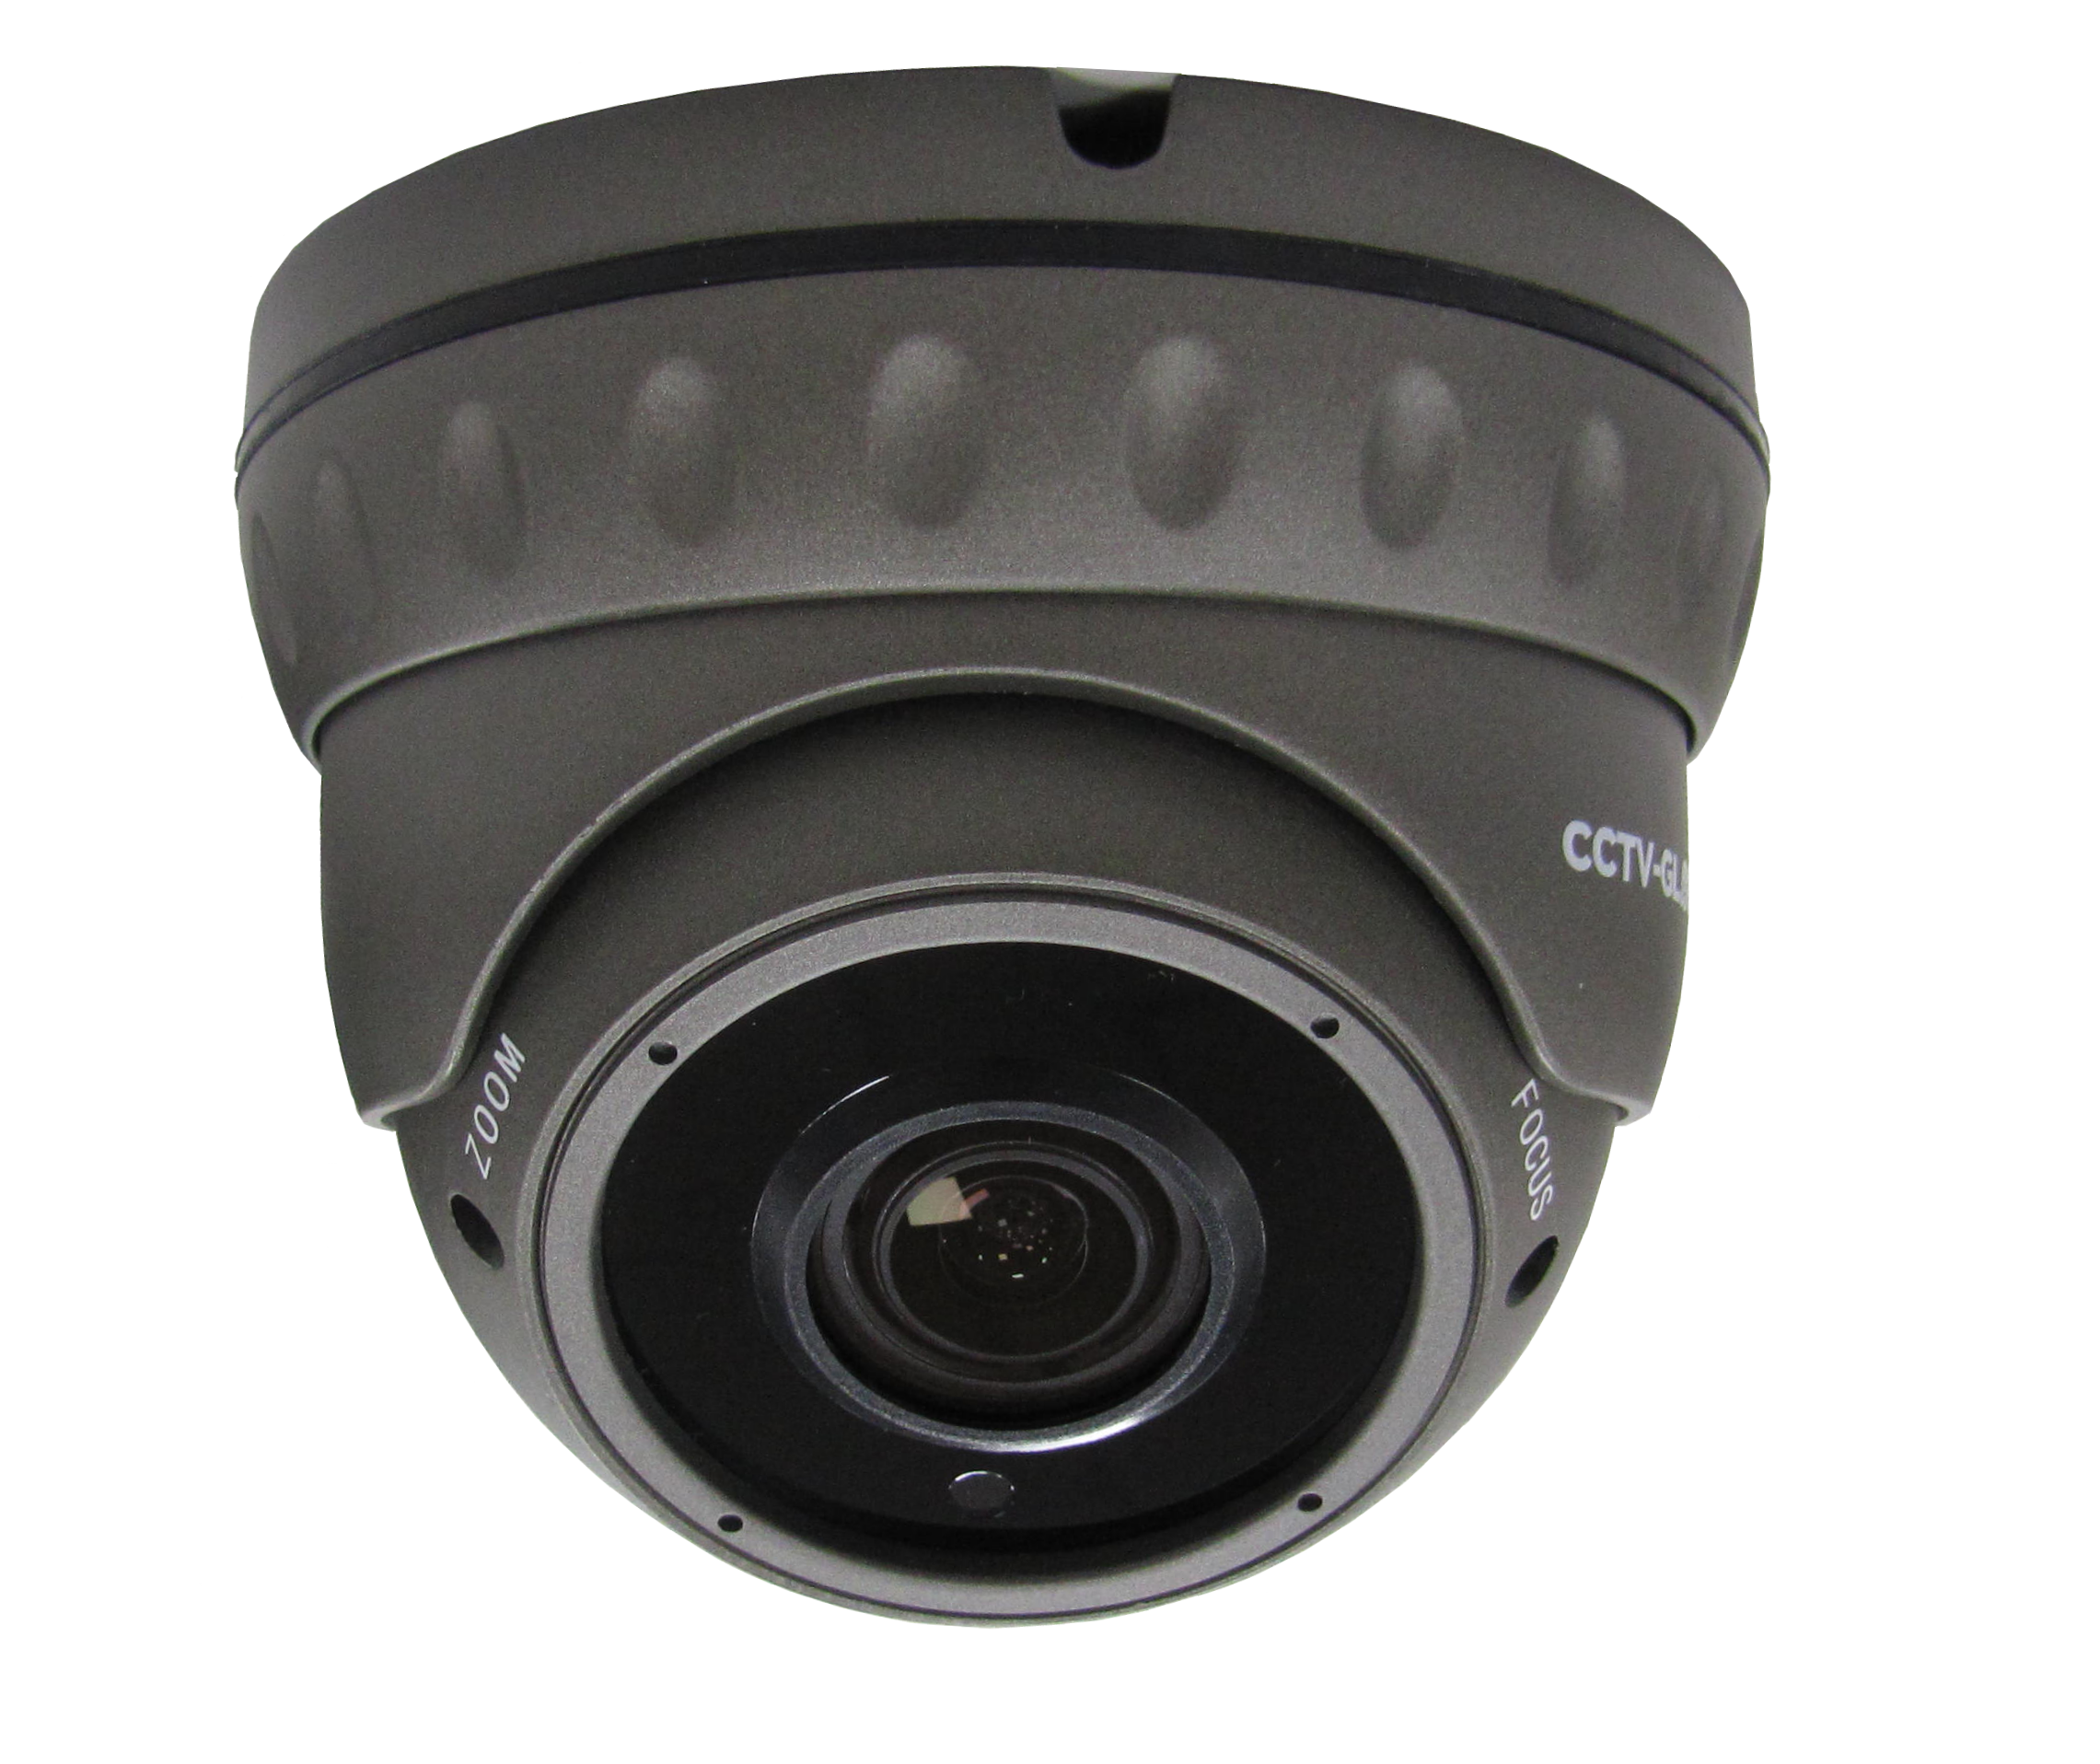 CCTV Dome Camera PNG Picture PNG, SVG Clip art for Web - Download Clip